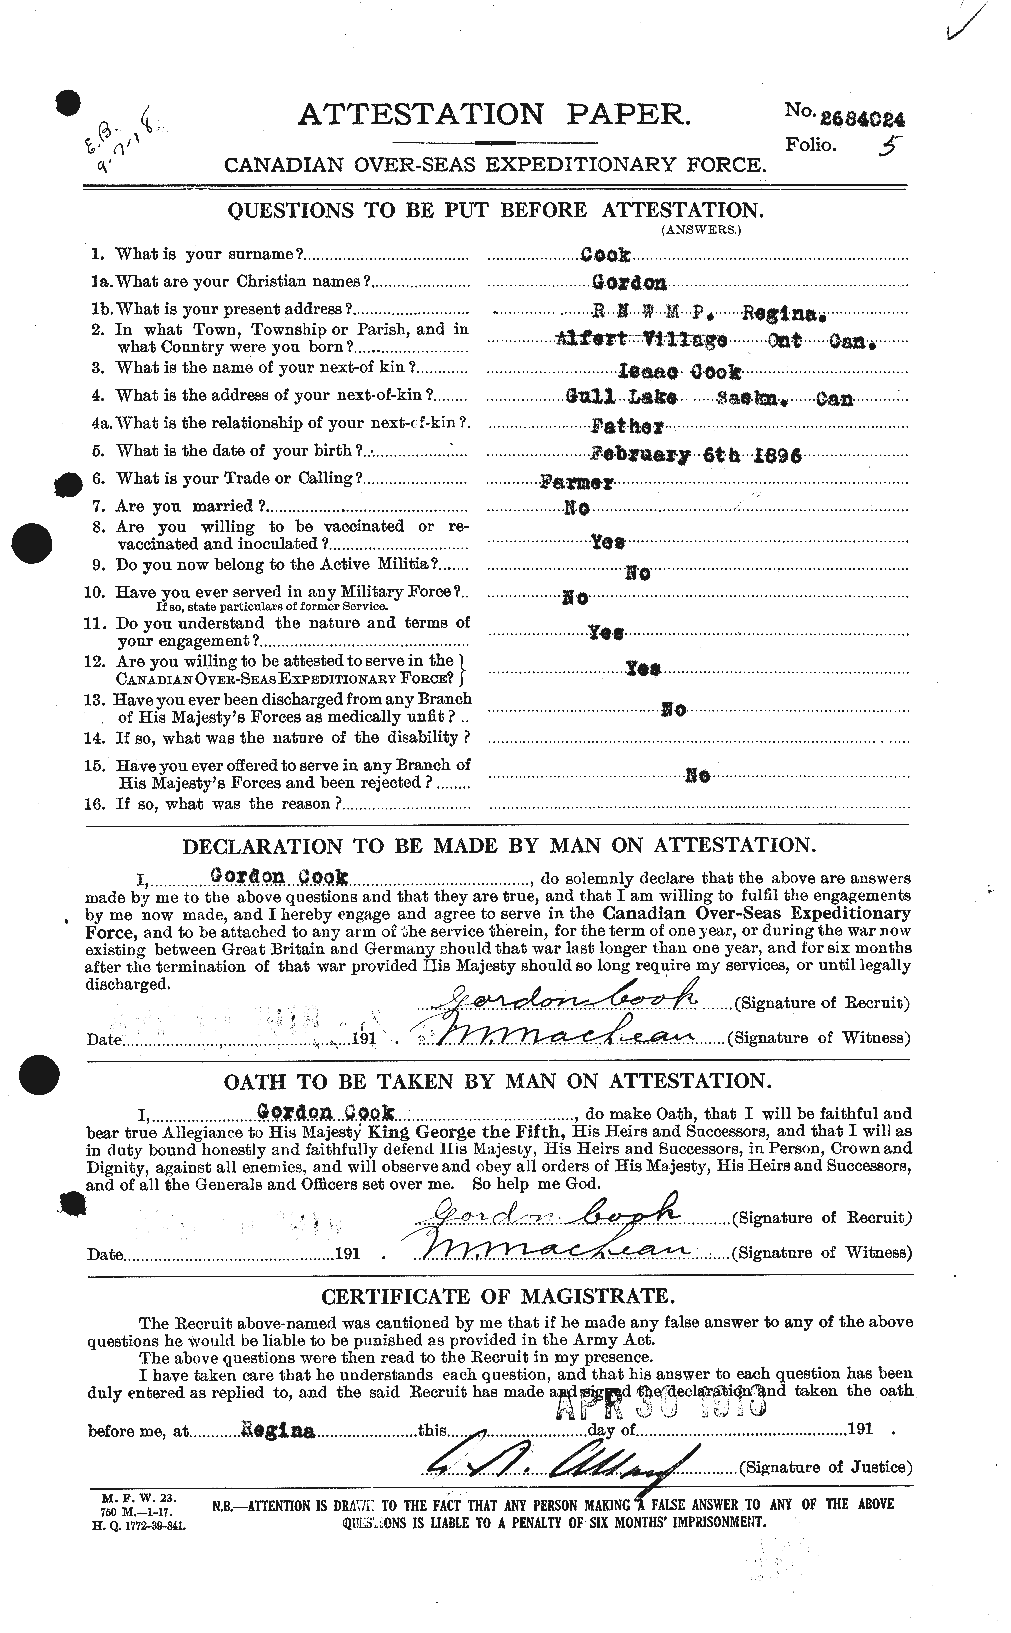 Personnel Records of the First World War - CEF 073789a